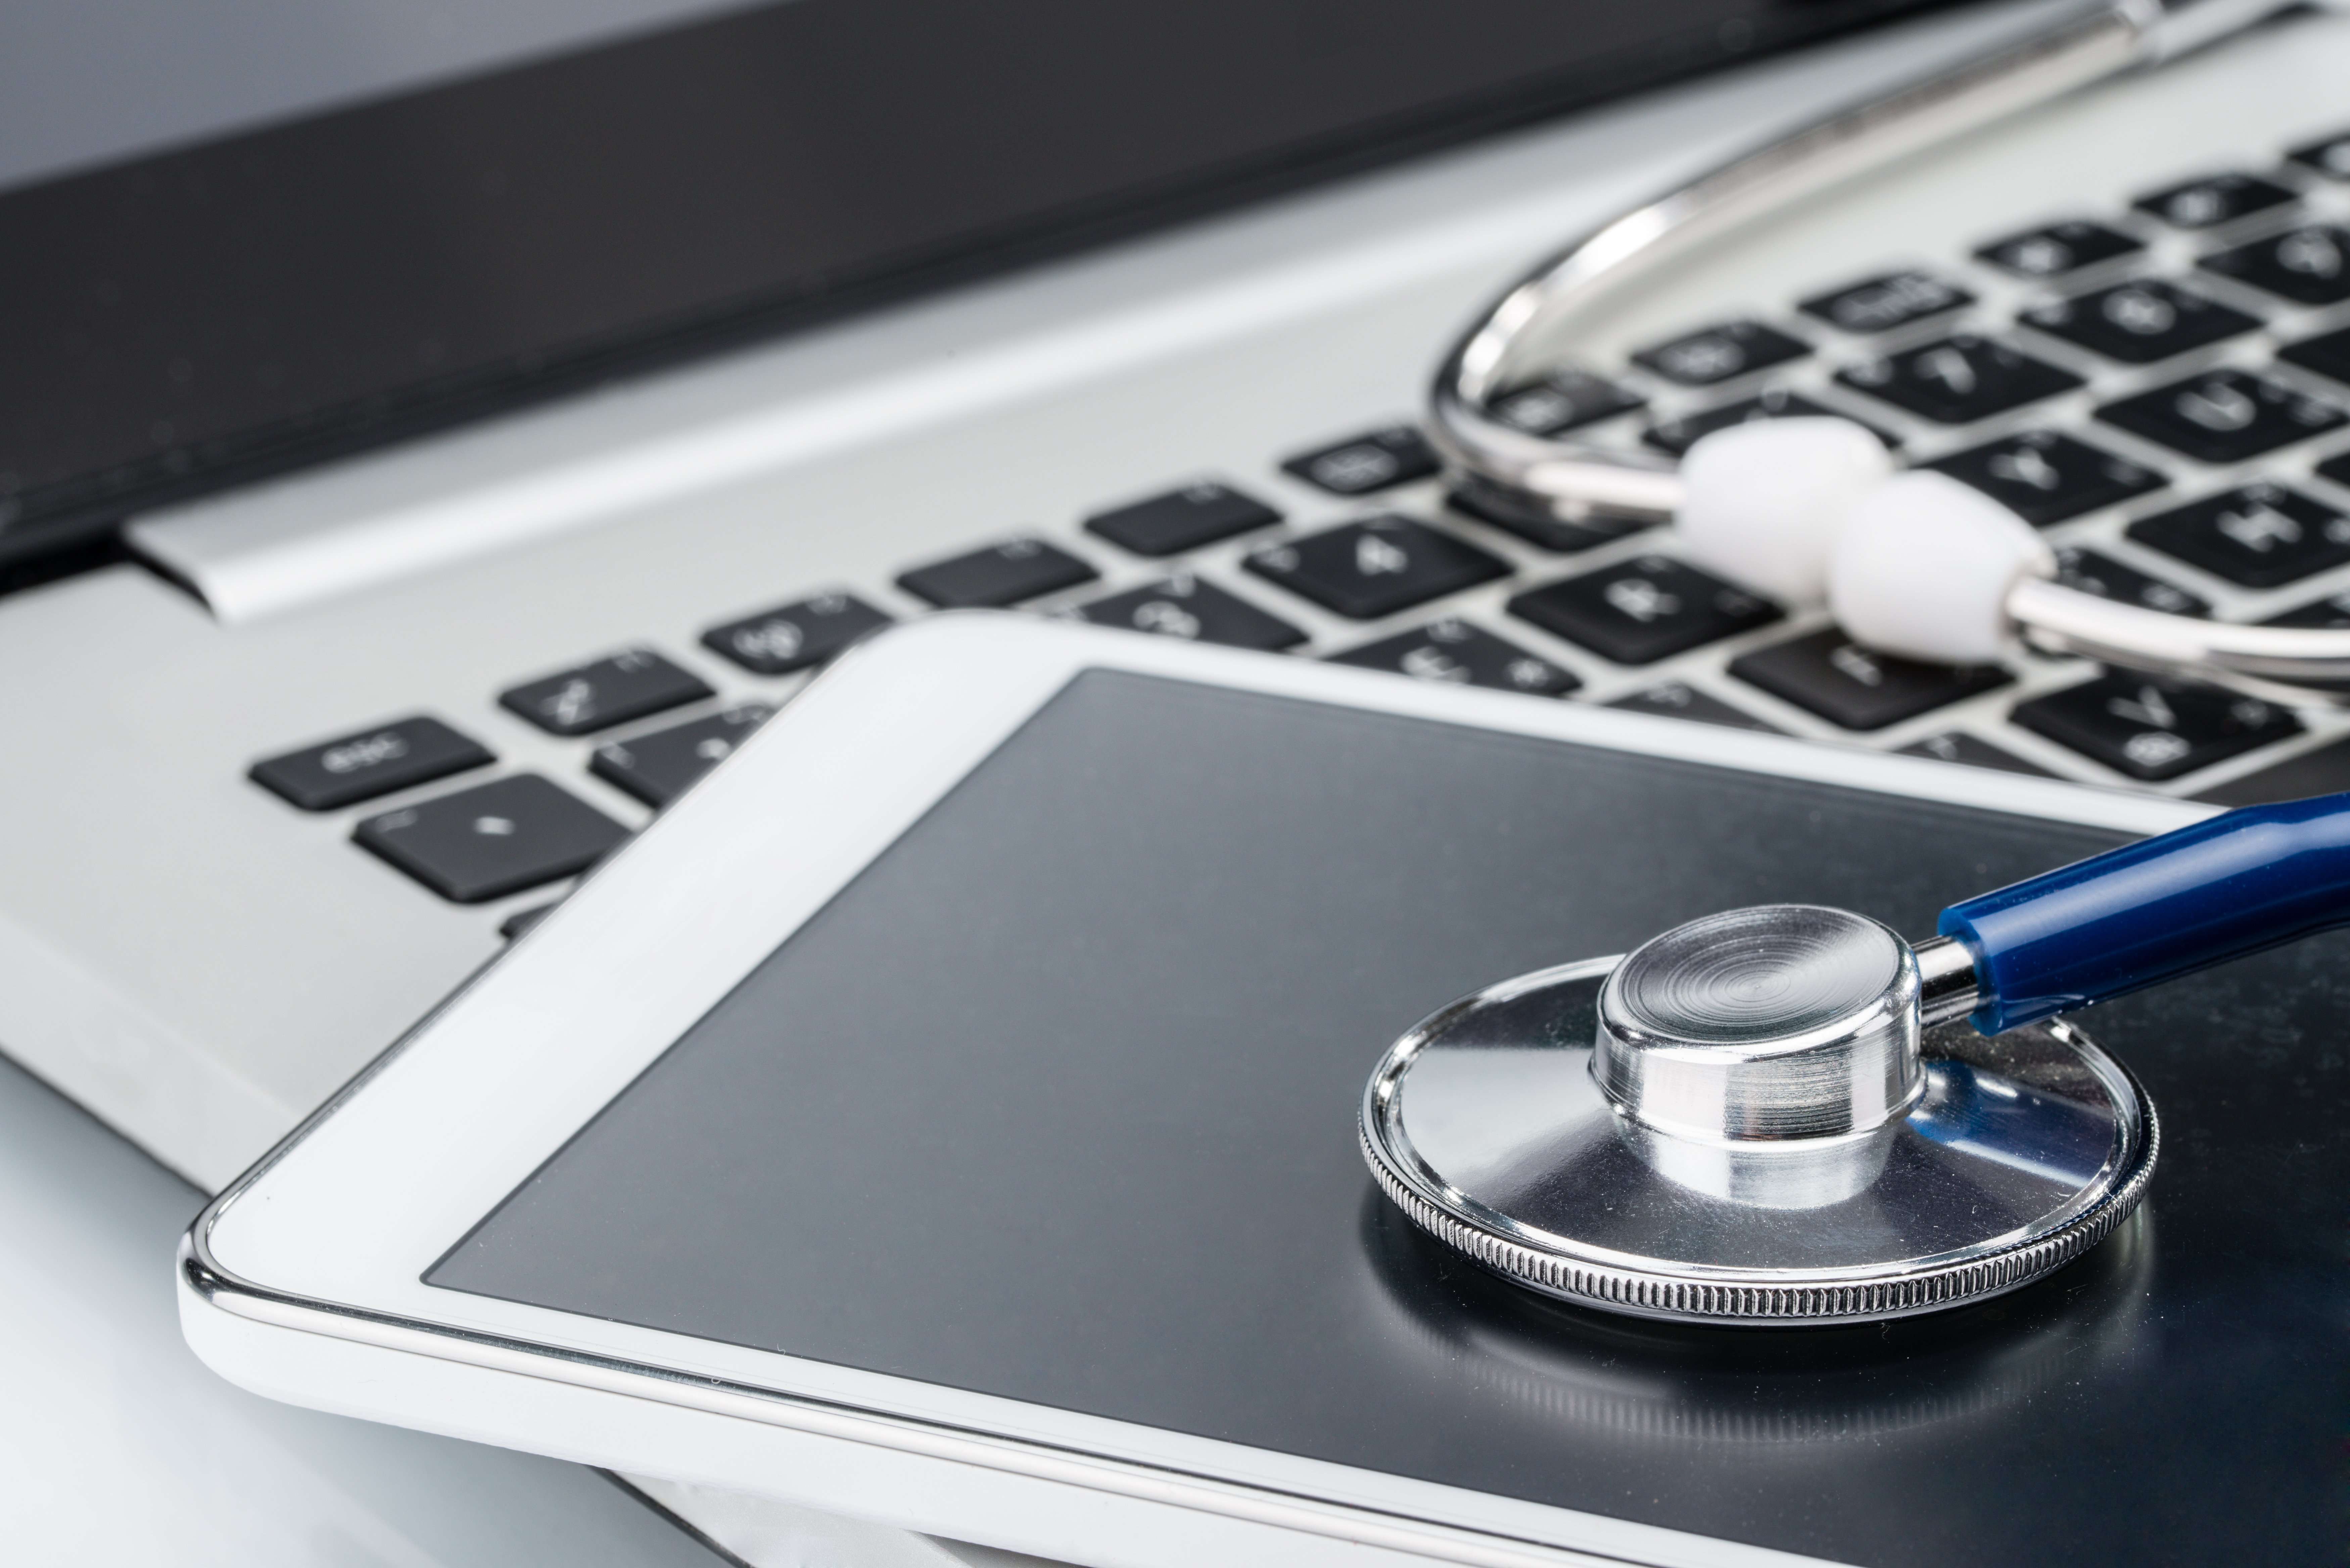 Survey finds alarming number of healthcare workers have not had cybersecurity training